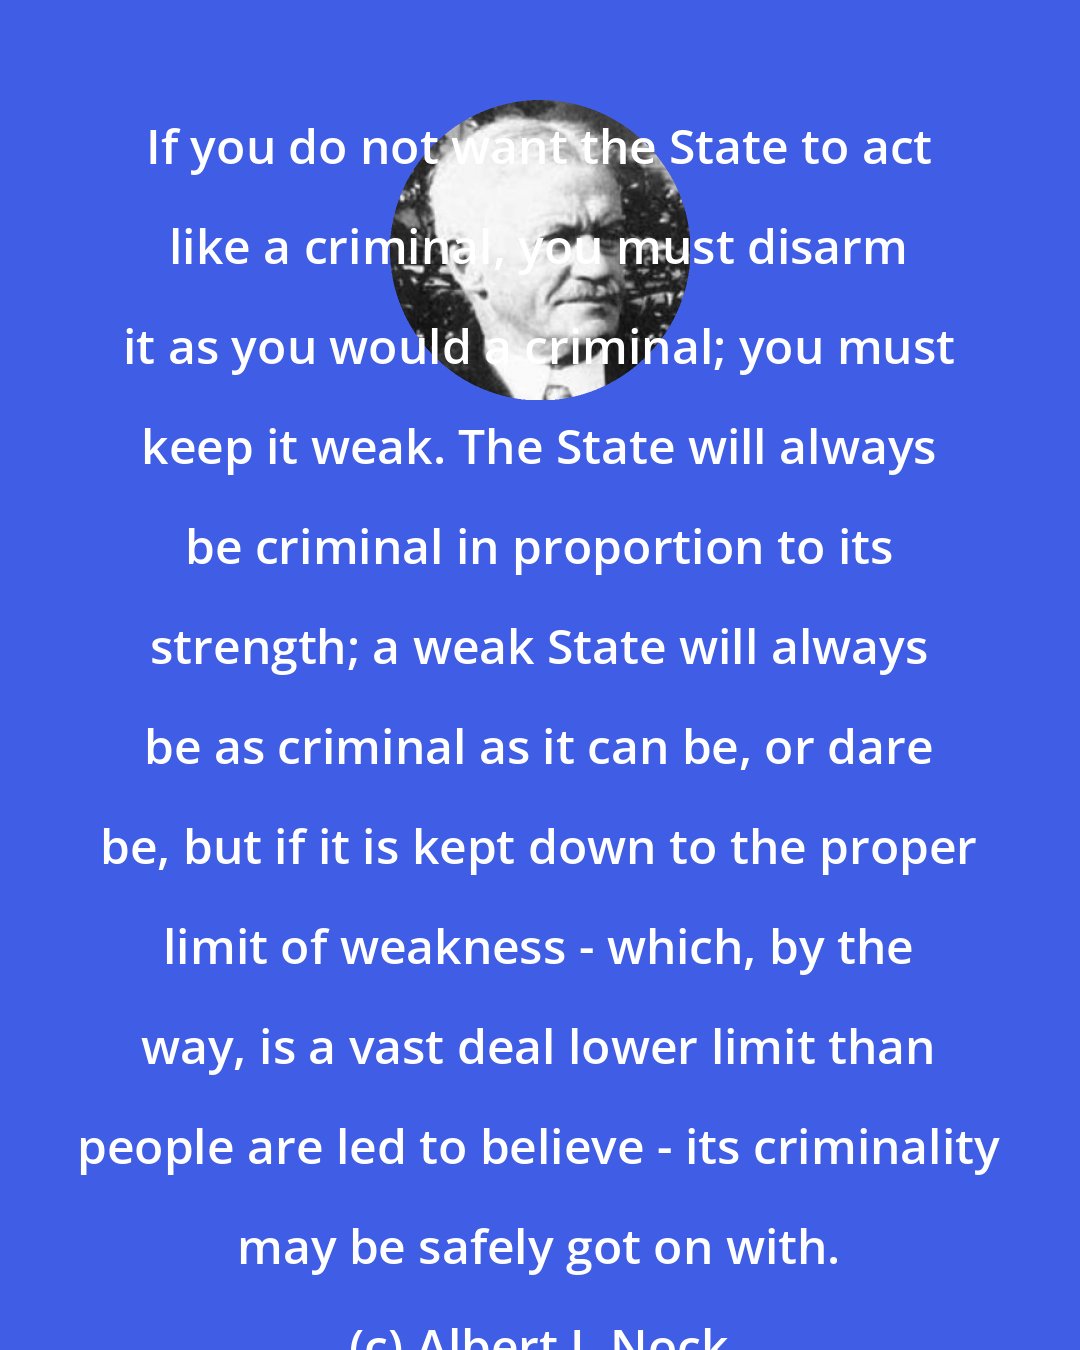 Albert J. Nock: If you do not want the State to act like a criminal, you must disarm it as you would a criminal; you must keep it weak. The State will always be criminal in proportion to its strength; a weak State will always be as criminal as it can be, or dare be, but if it is kept down to the proper limit of weakness - which, by the way, is a vast deal lower limit than people are led to believe - its criminality may be safely got on with.